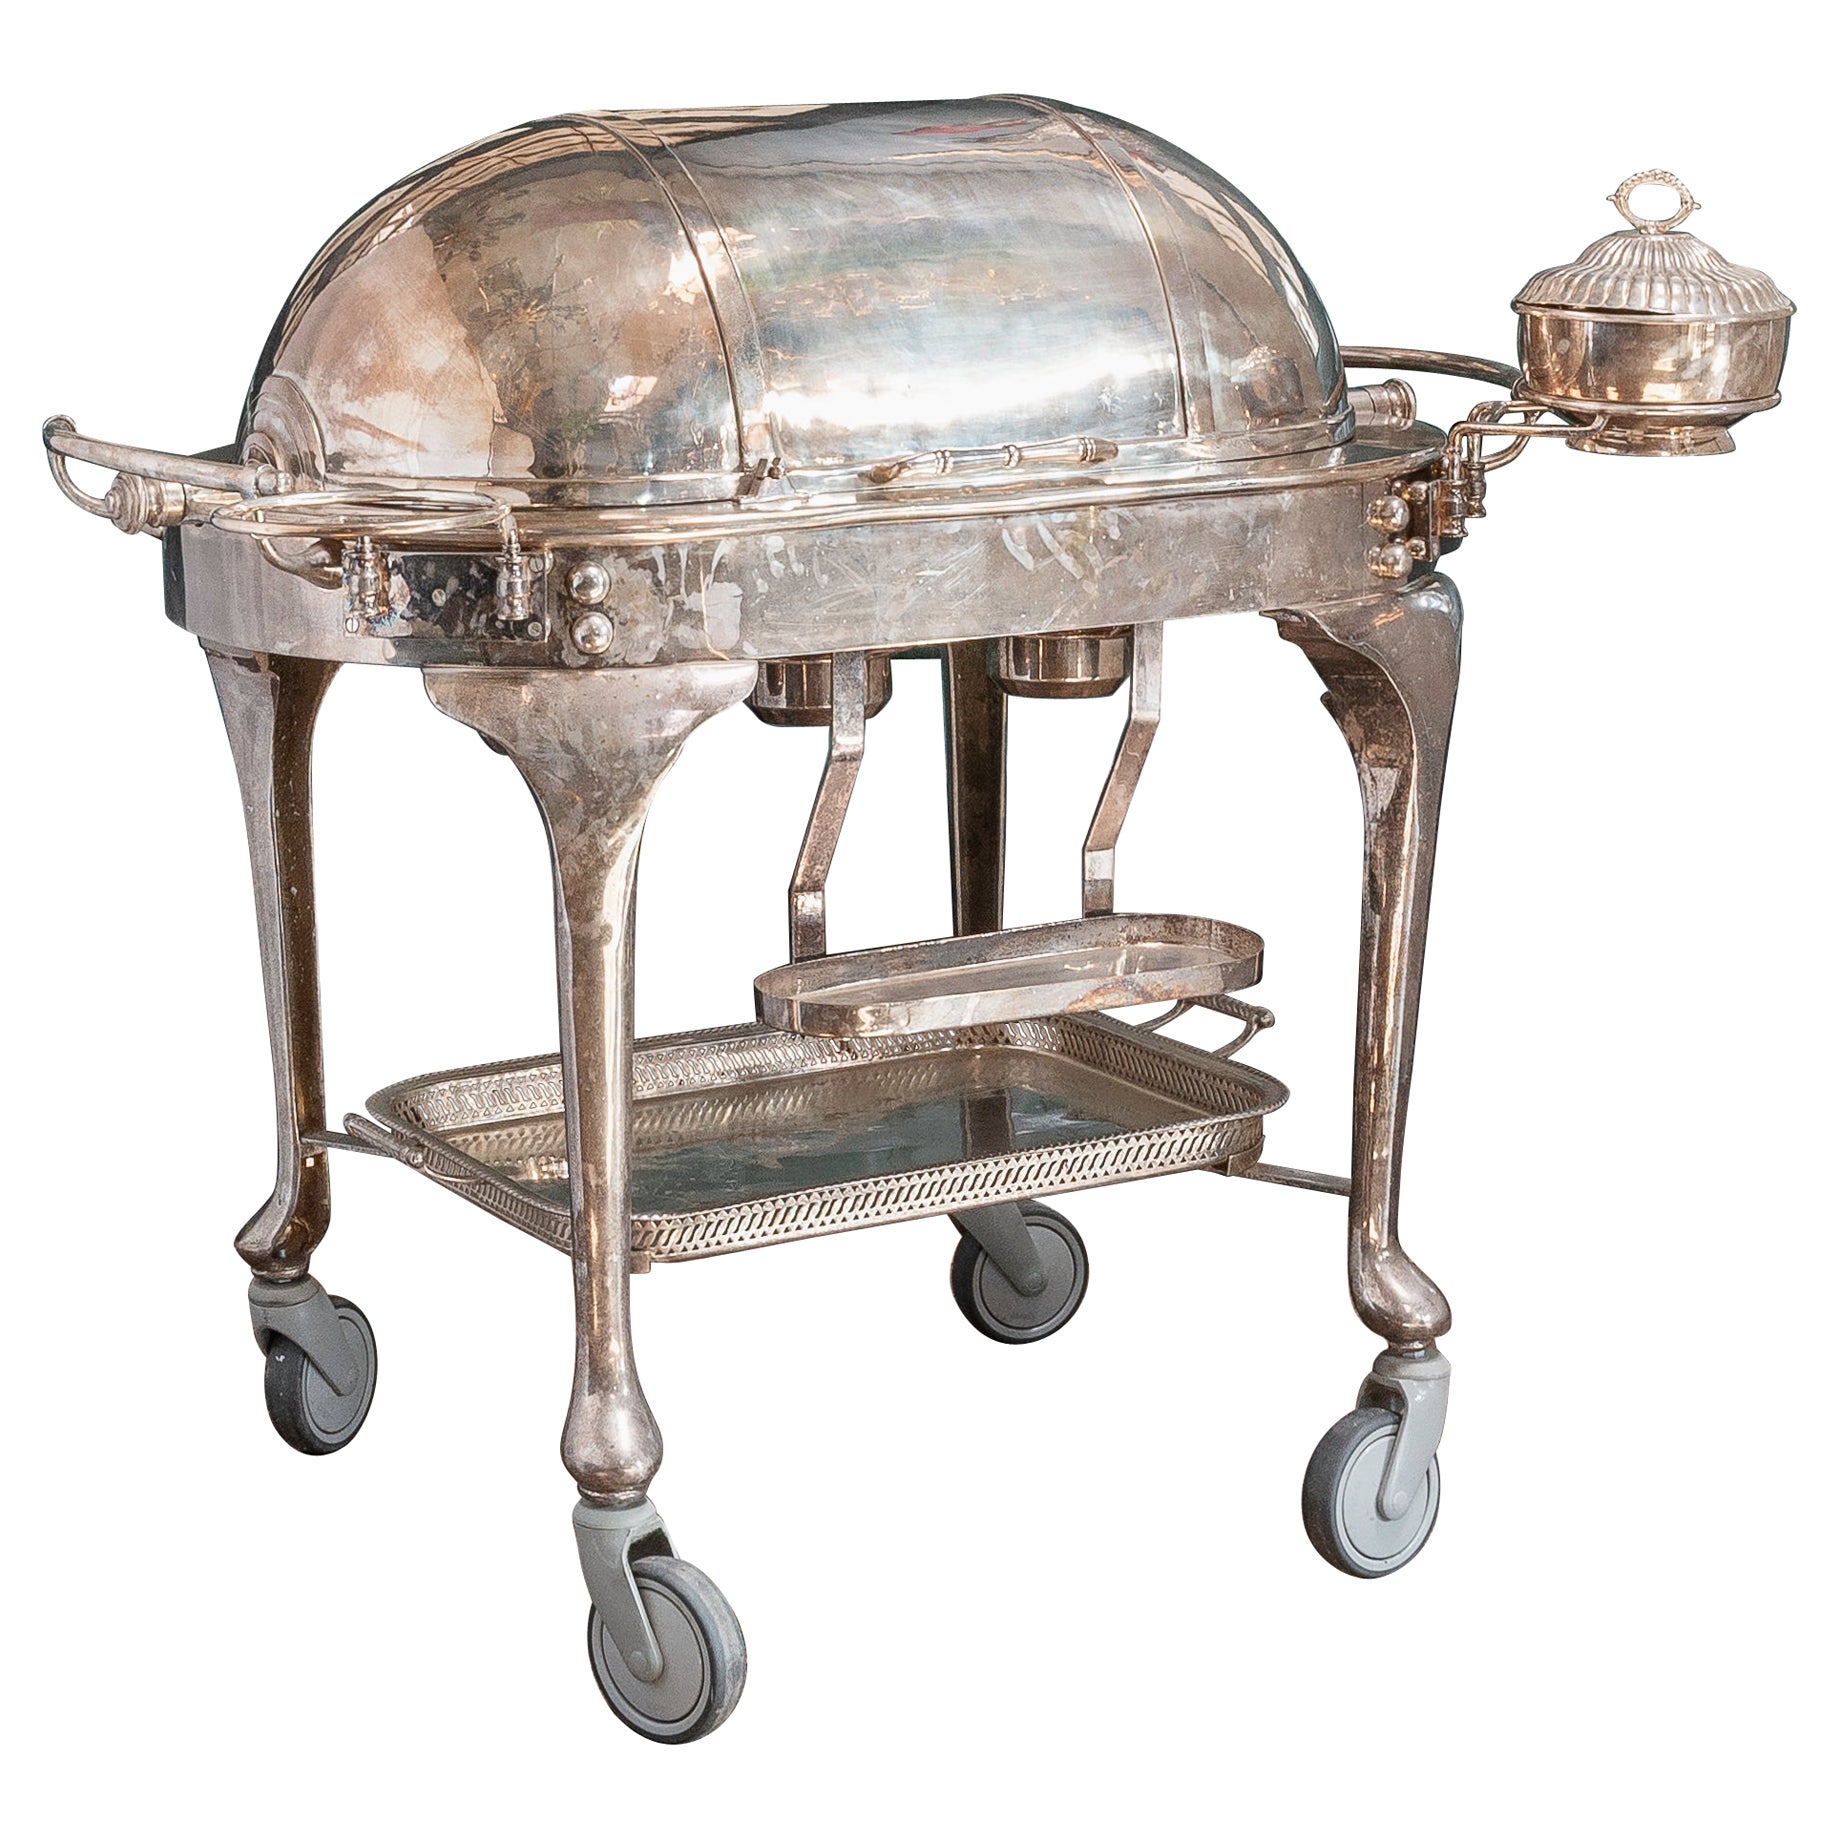 A Large English Silver Plated Beef Carving Trolley